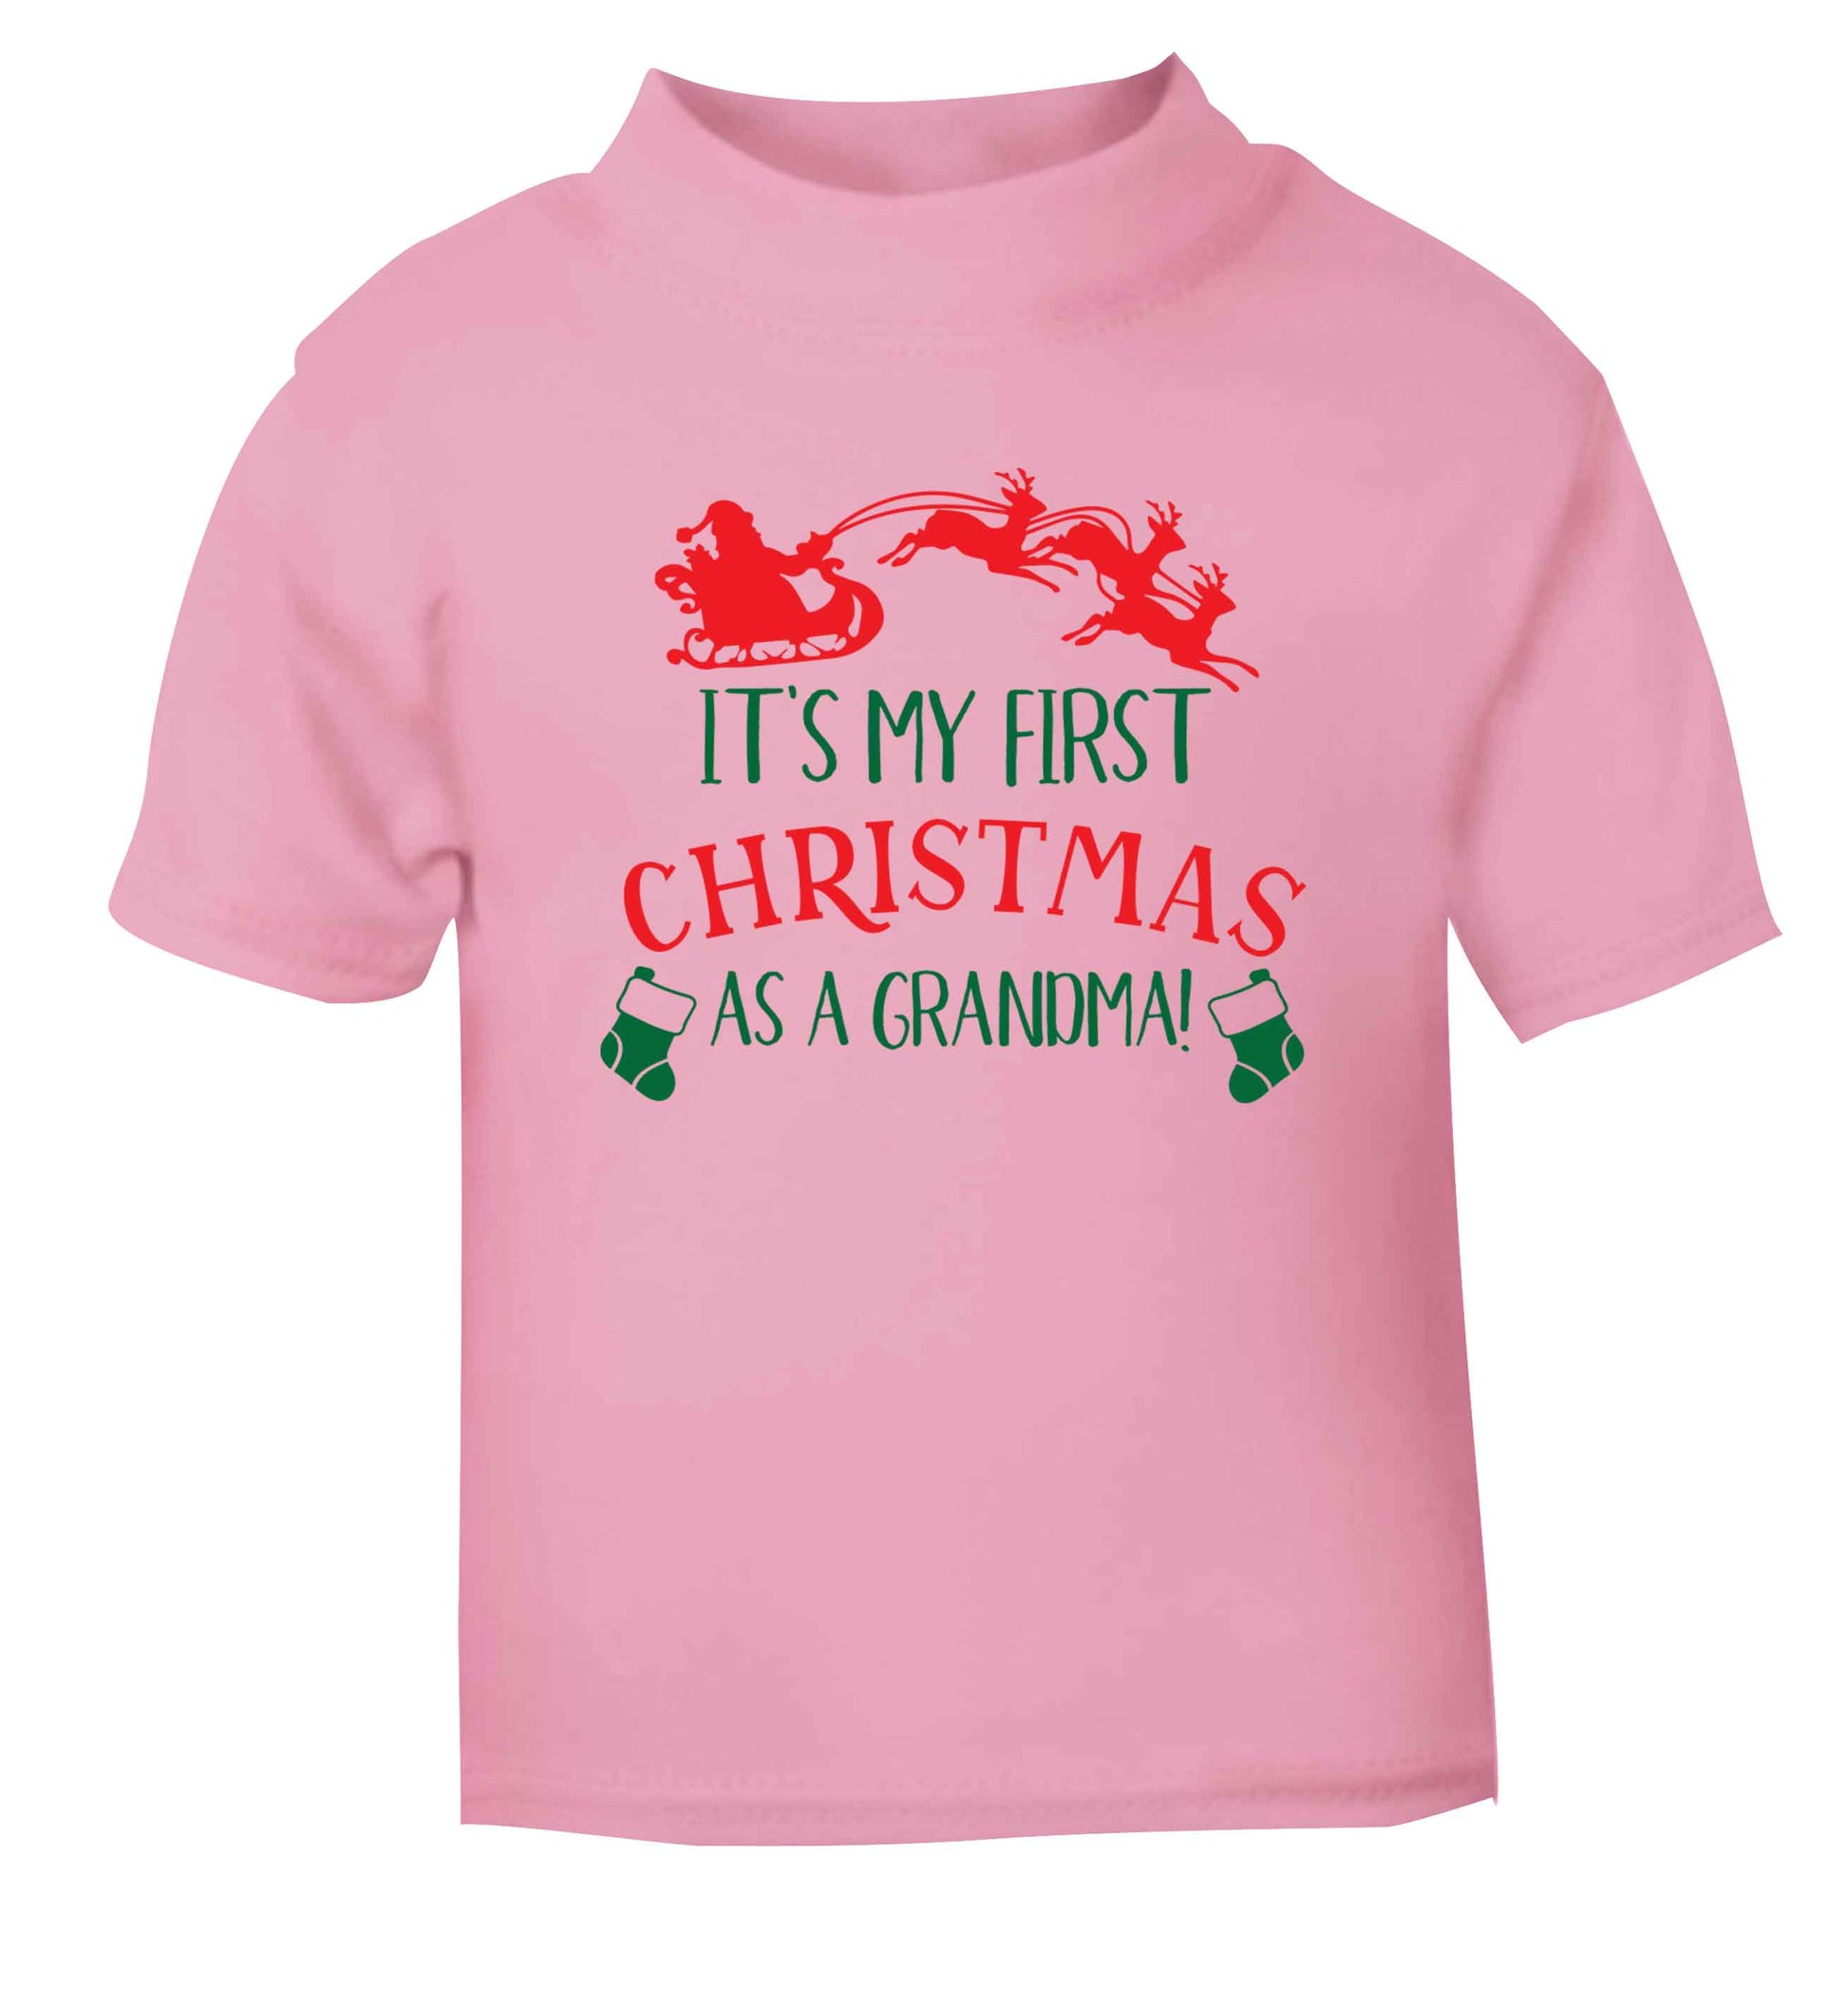 It's my first Christmas as a grandma! light pink Baby Toddler Tshirt 2 Years